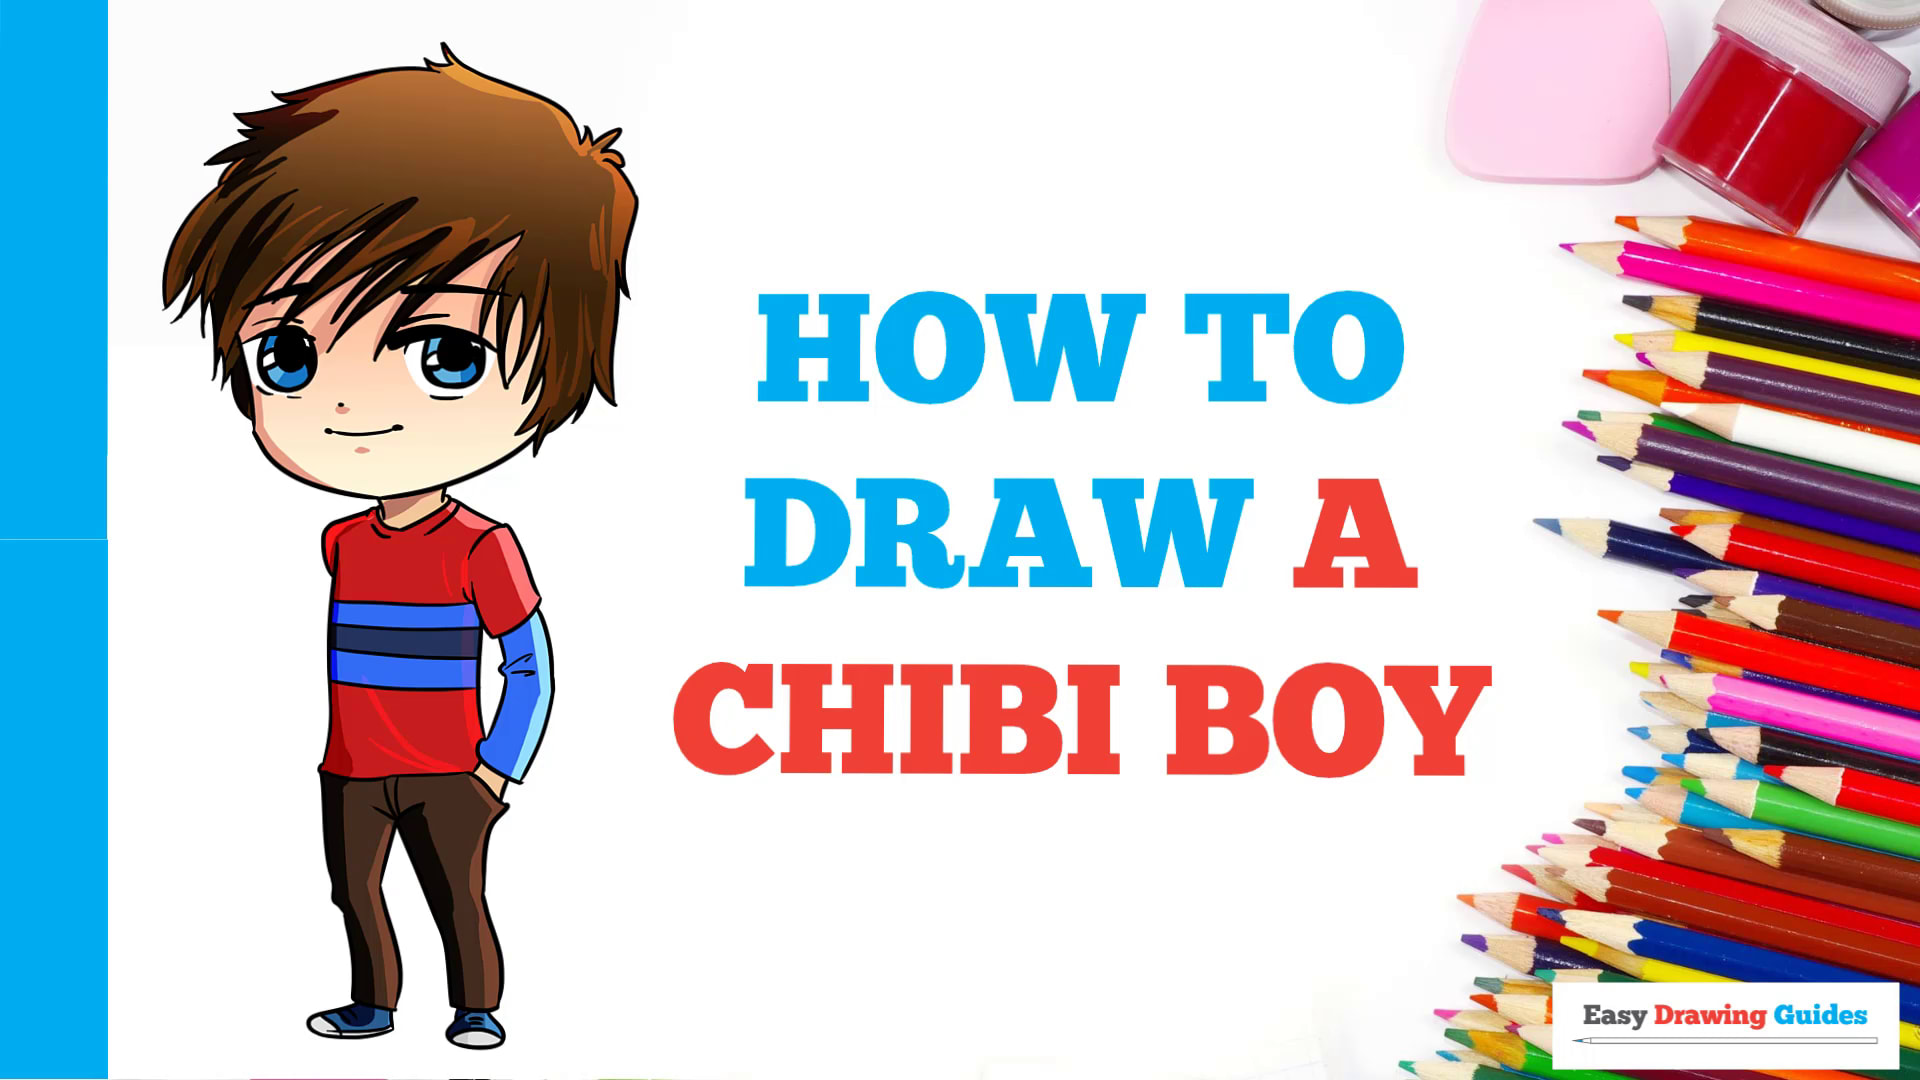 How to Draw a Chibi Boy - Really Easy Drawing Tutorial